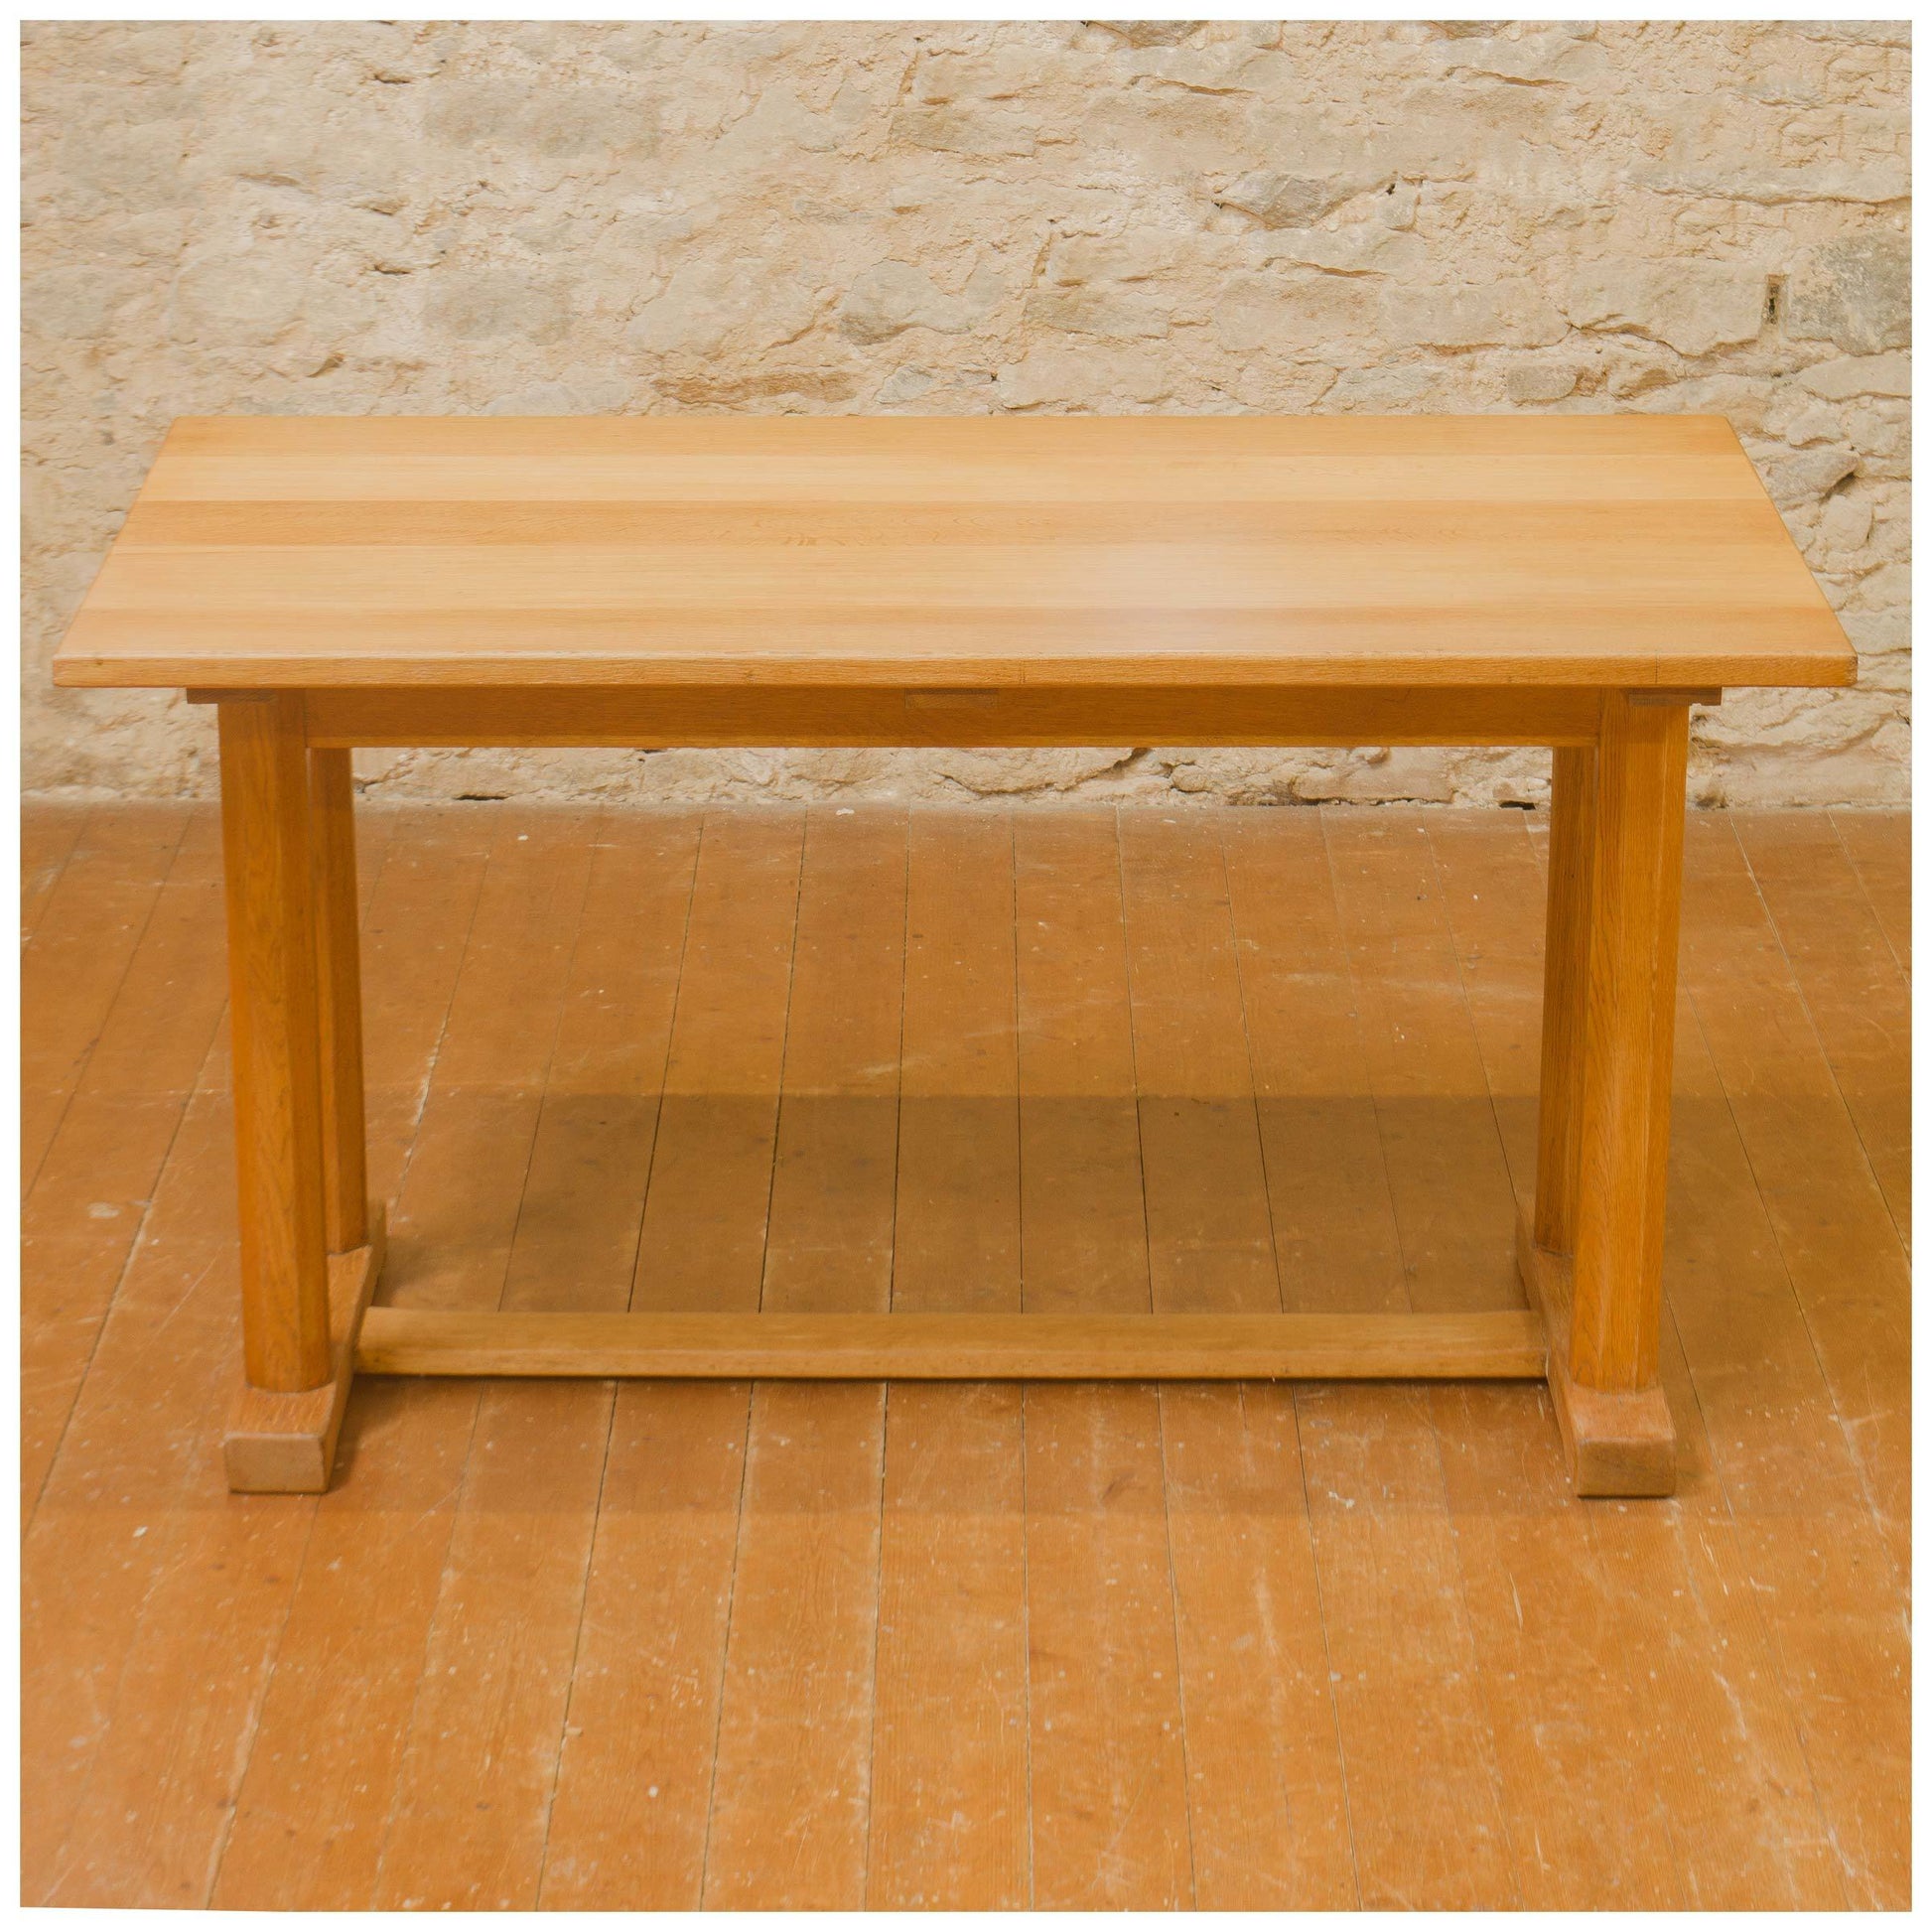 Gordon Russell Arts & Crafts Cotswold School English Oak Dining Table c. 1930